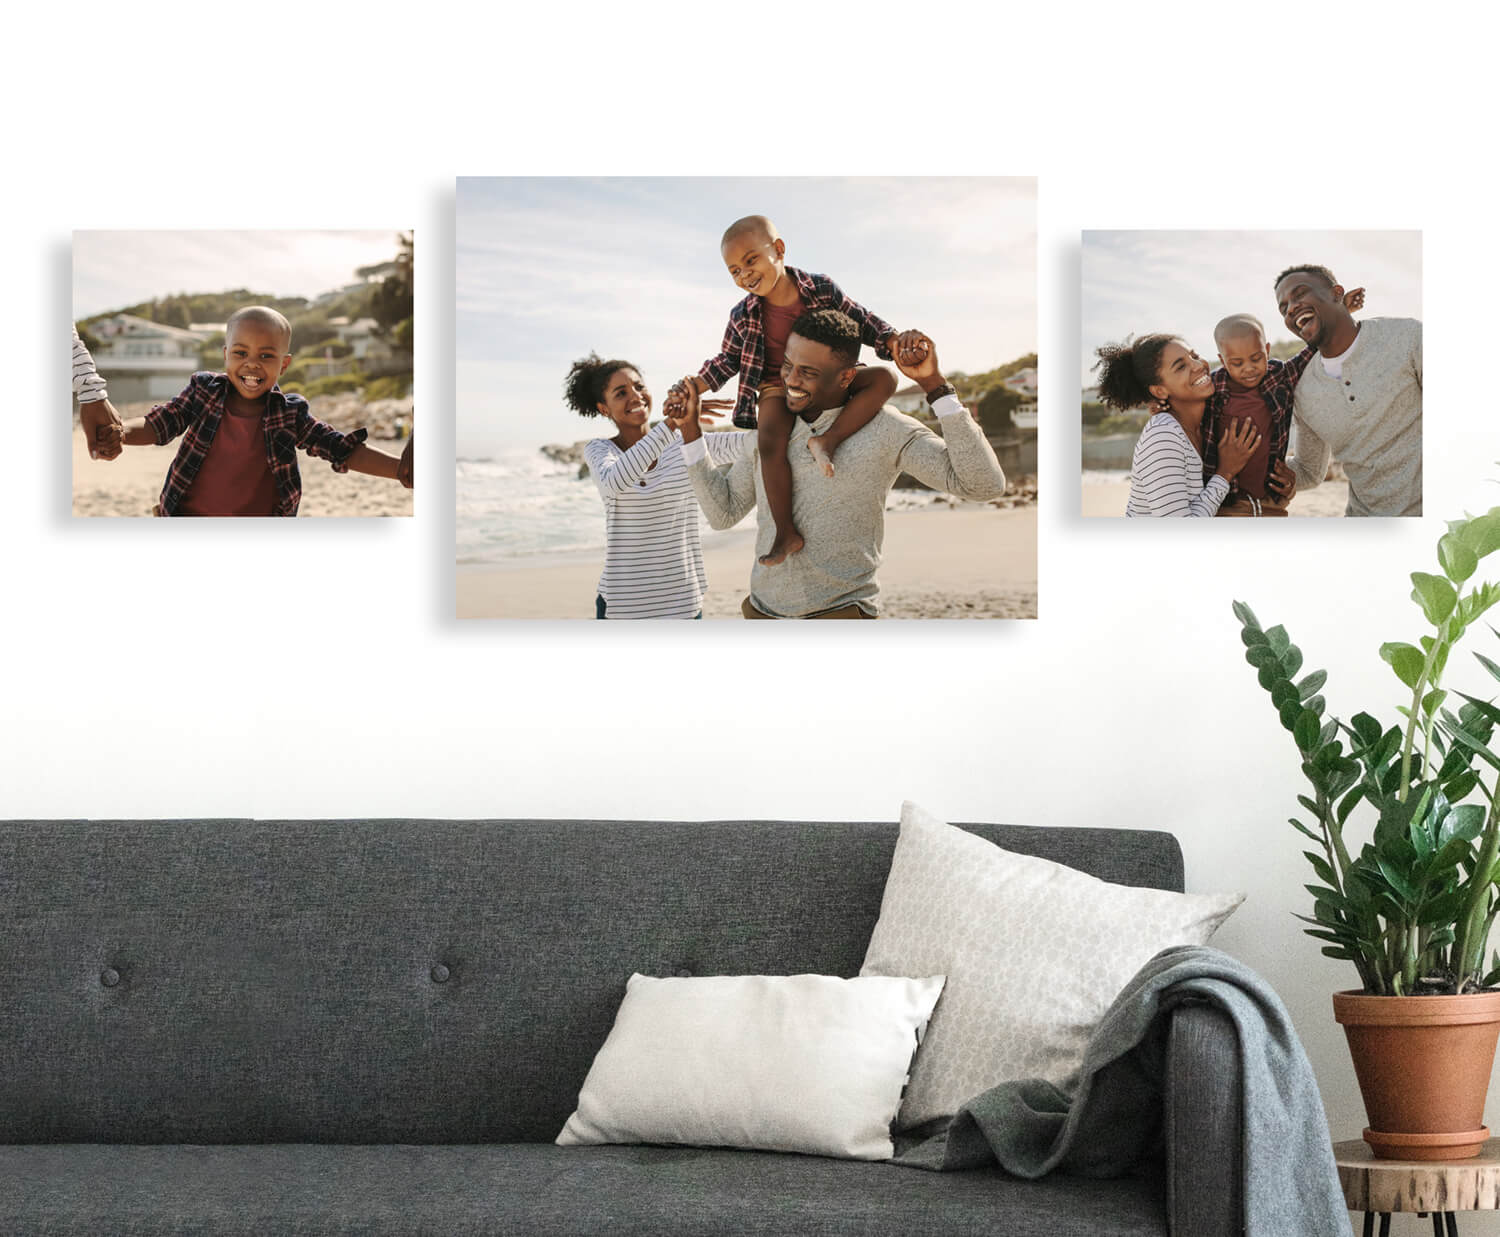 How To Use Display Wall Portraits To Sell More